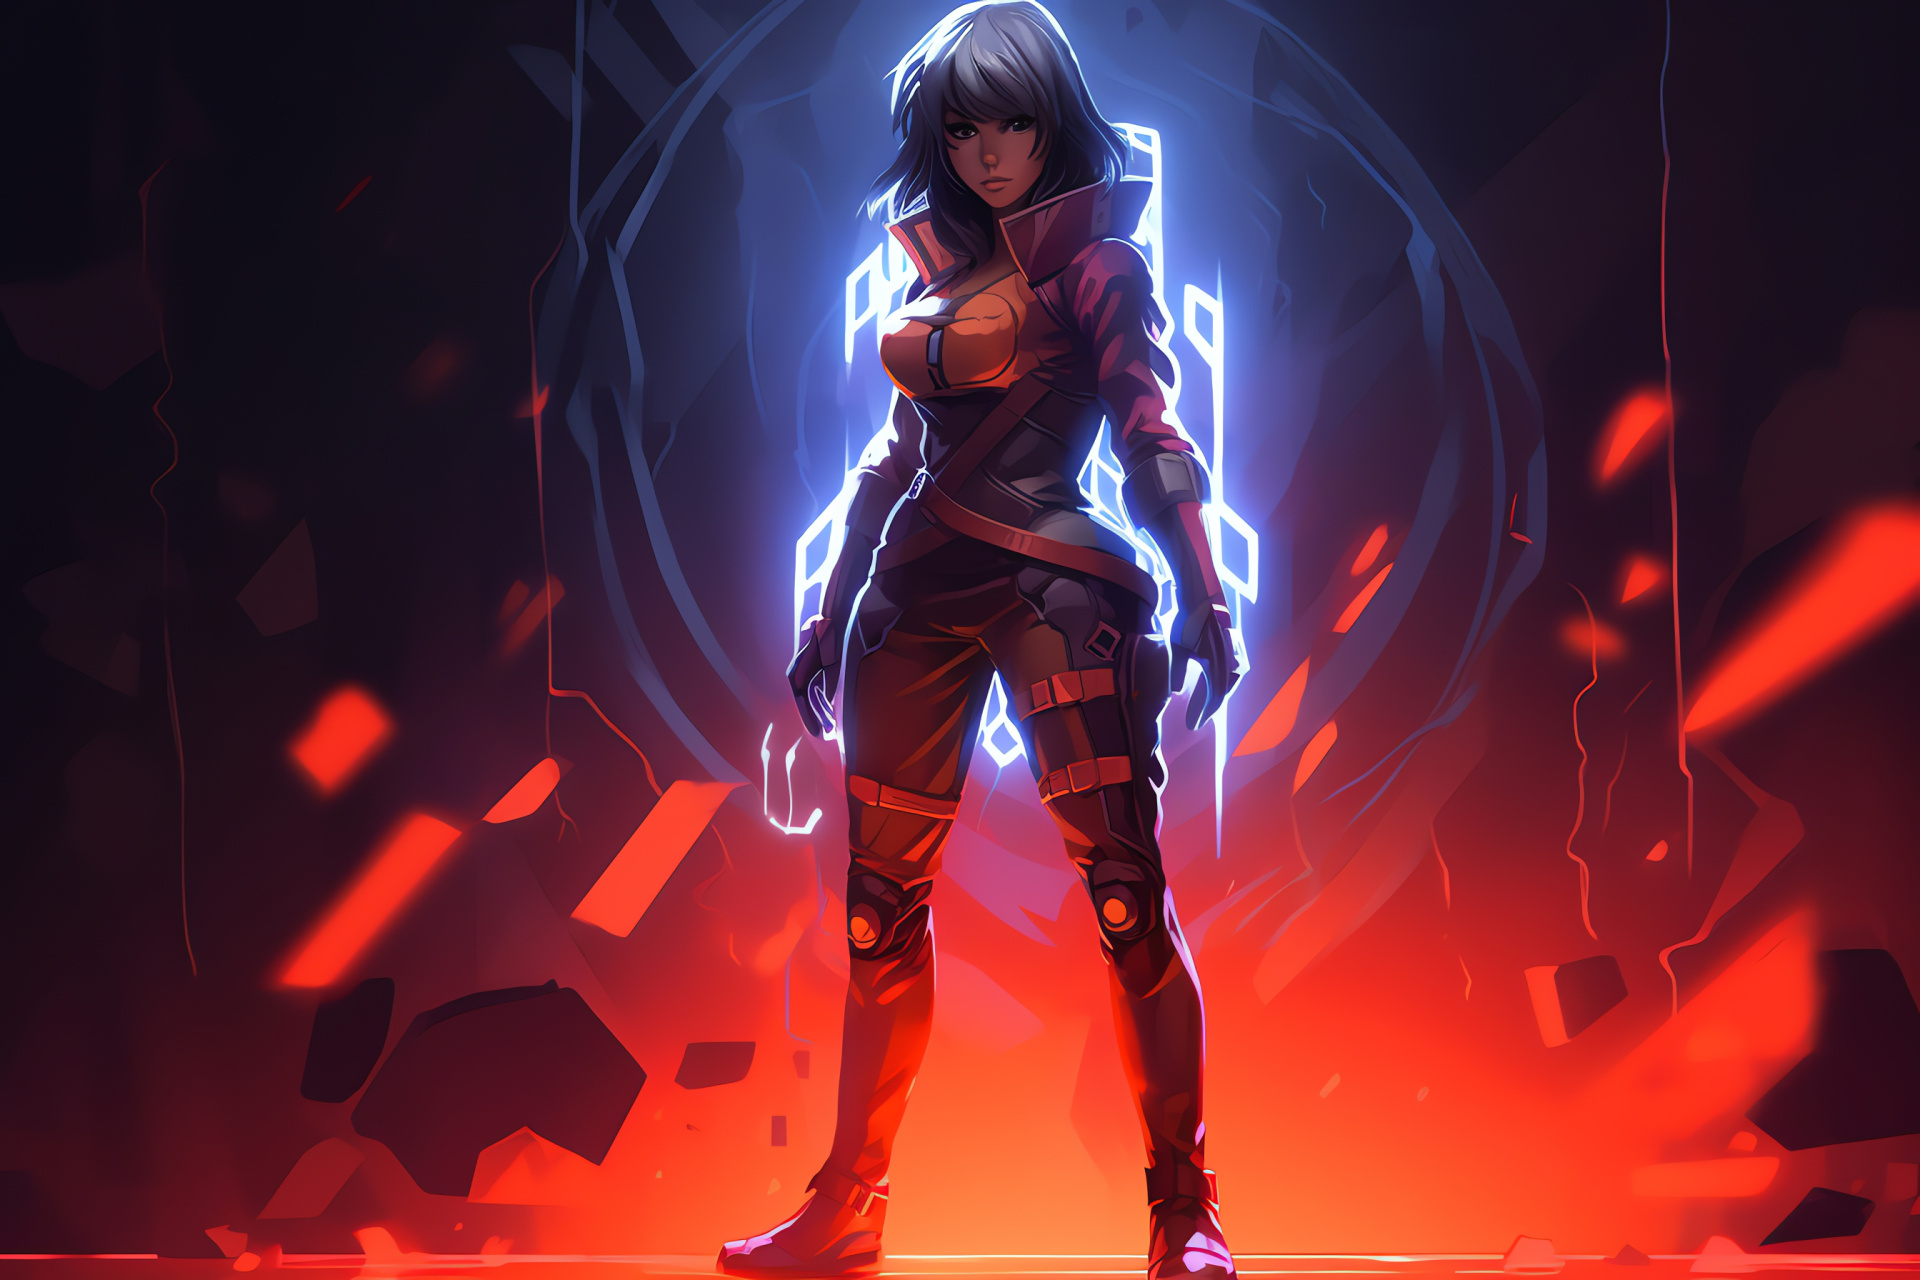 Mia character, Amber-eyed avatar, Commanding digital soldier, Video game protagonist, Confident female fighter, HD Desktop Image